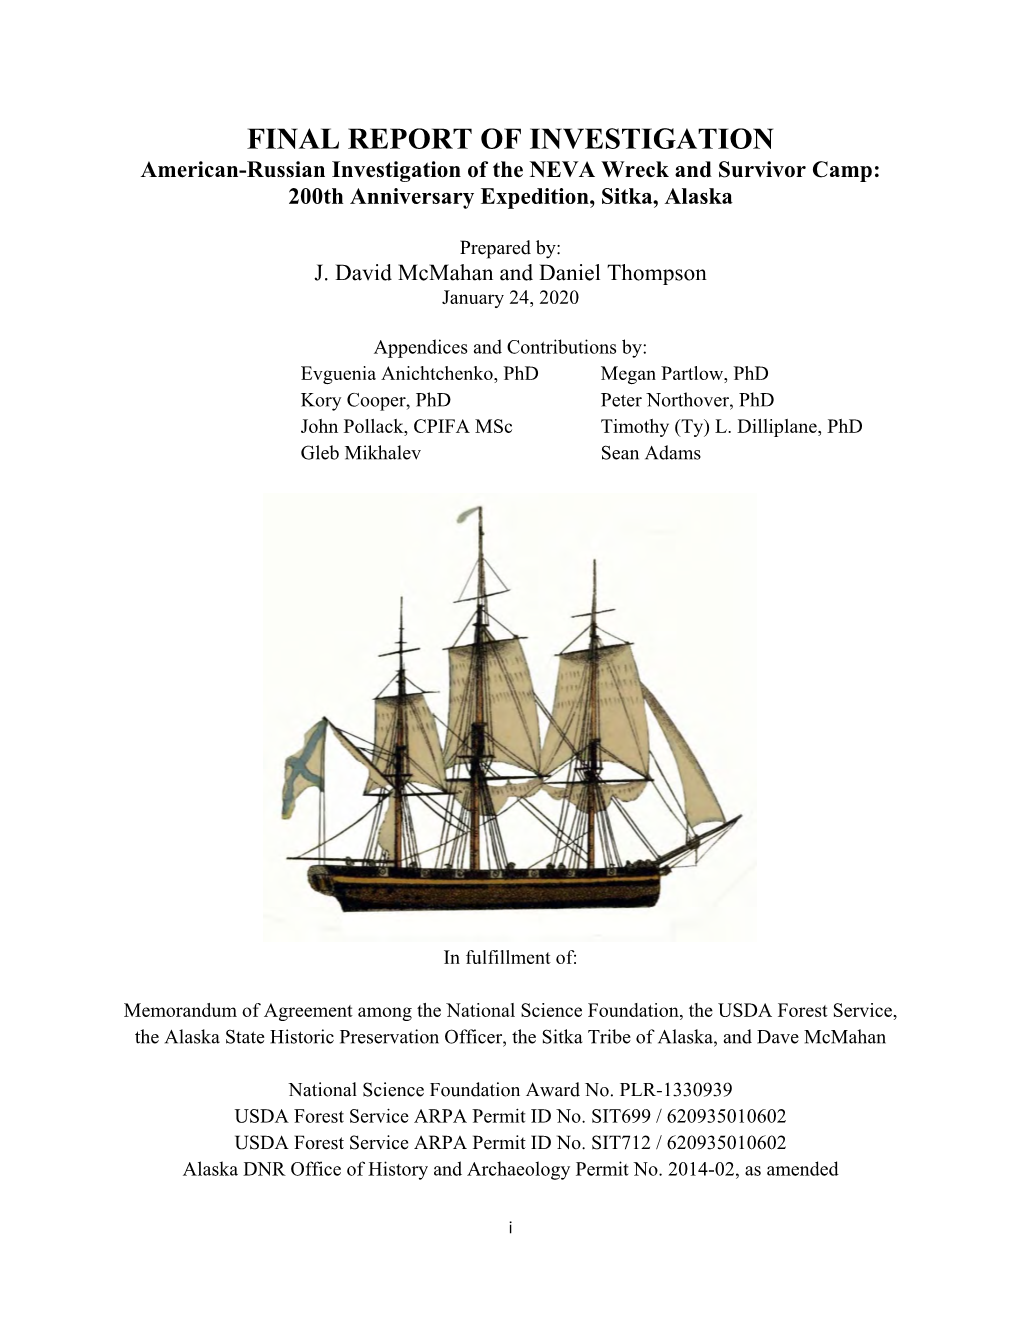 FINAL REPORT of INVESTIGATION American-Russian Investigation of the NEVA Wreck and Survivor Camp: 200Th Anniversary Expedition, Sitka, Alaska